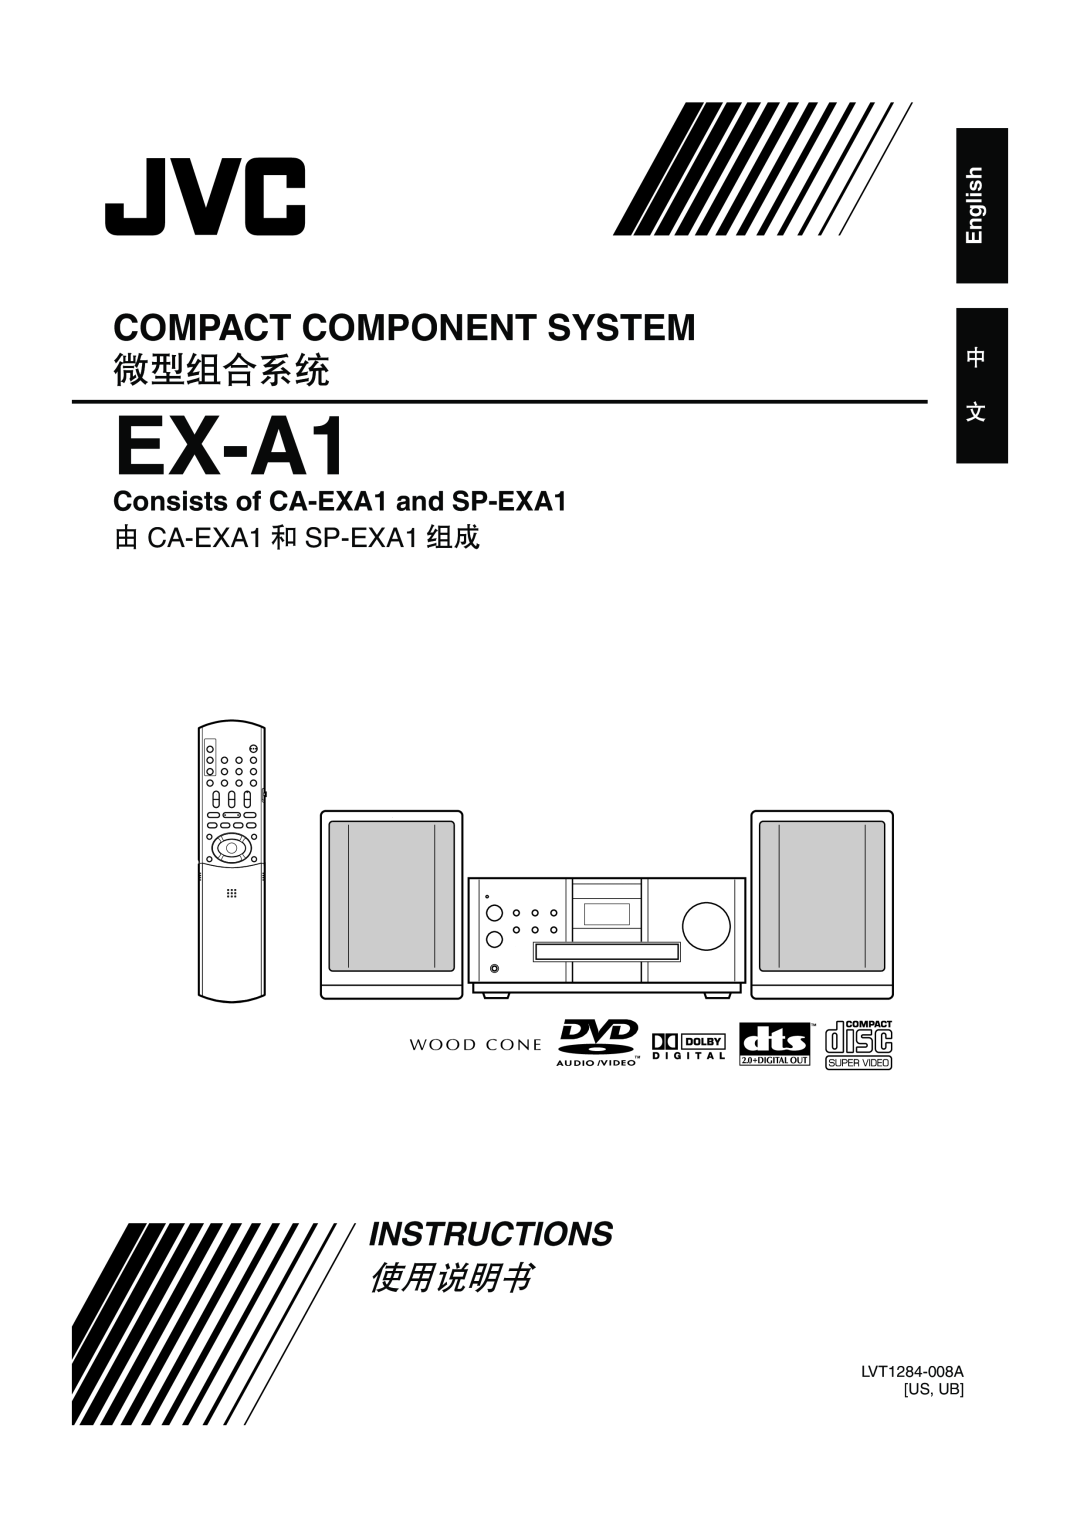 JVC EX-A1 manual Instructions, Consists of CA-EXA1and SP-EXA1, English, Compact Component System, 微型组合系统, 使用说明书 